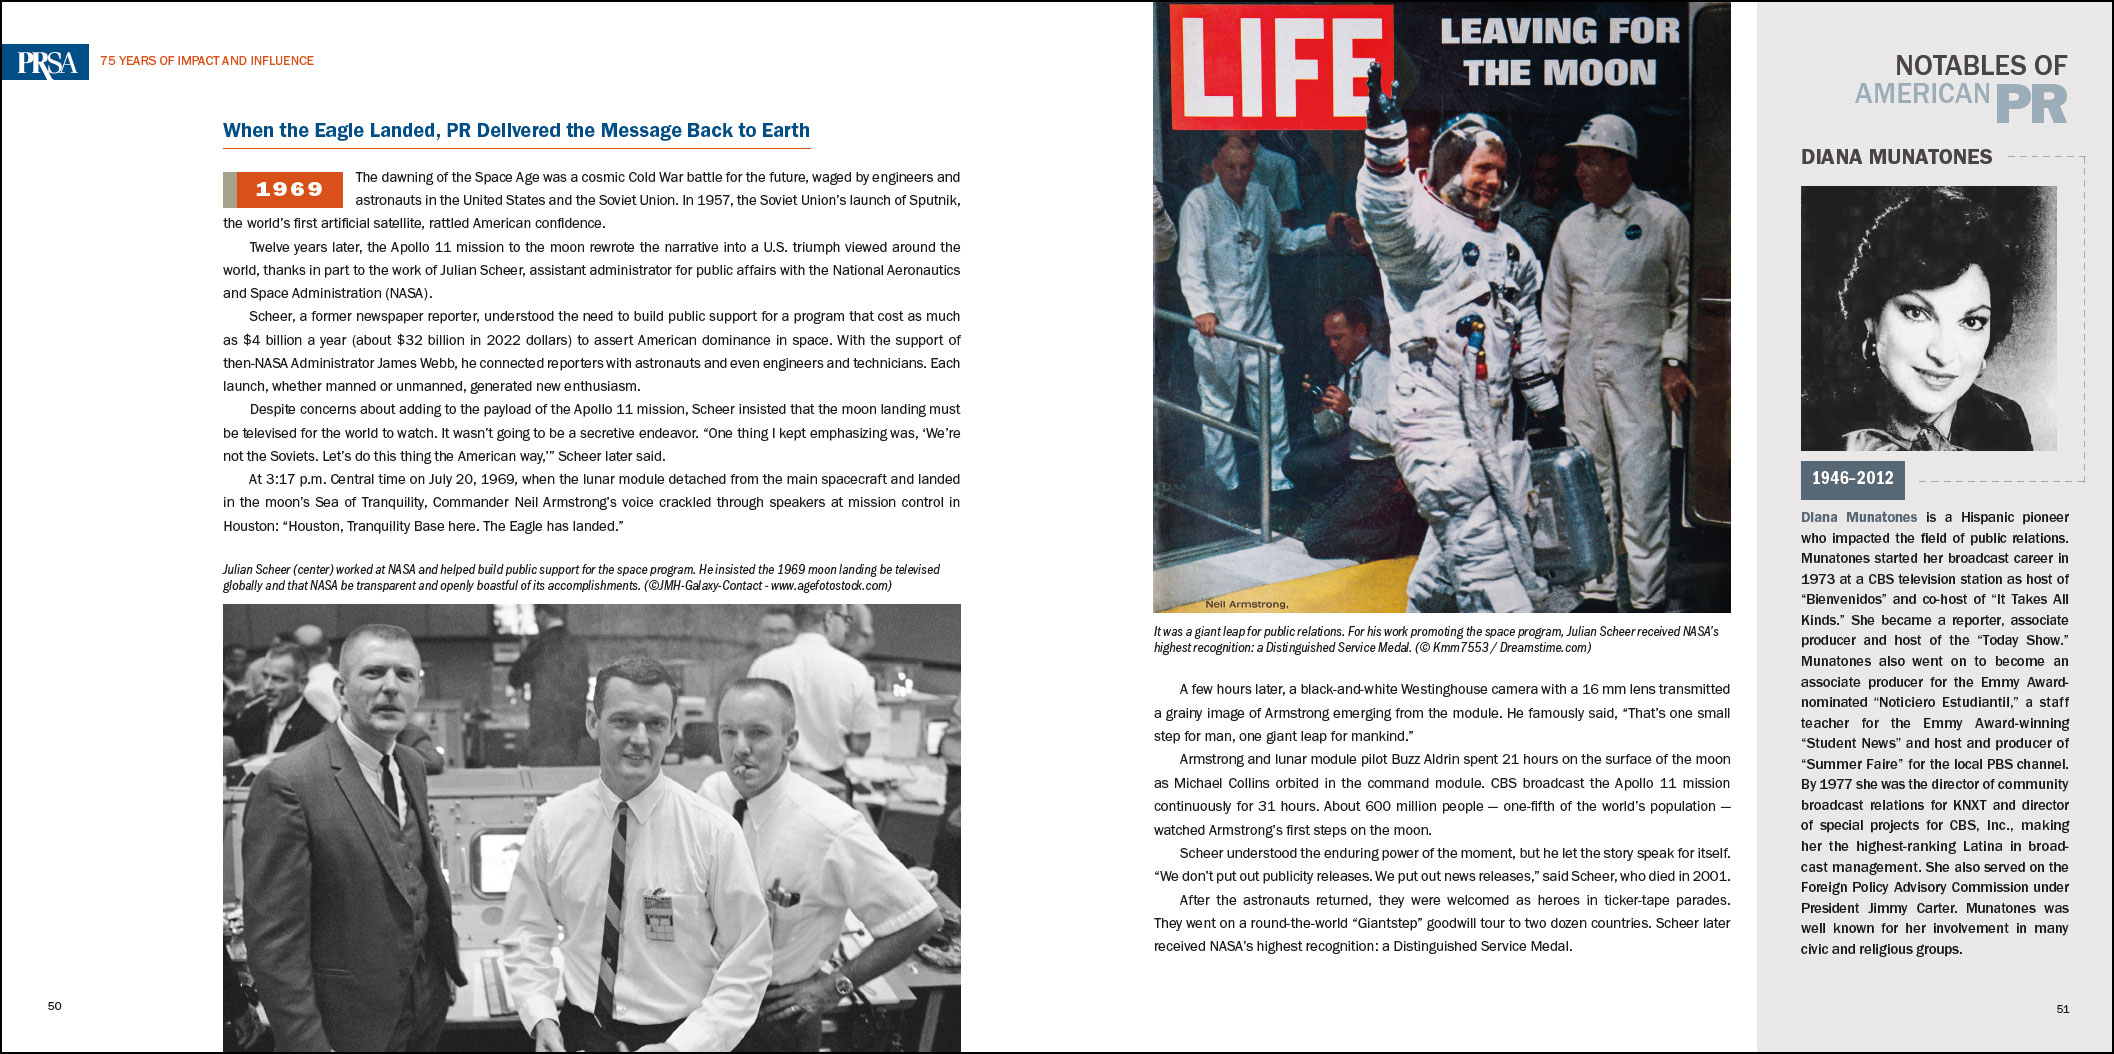 Book spread with LIFE magazine cover